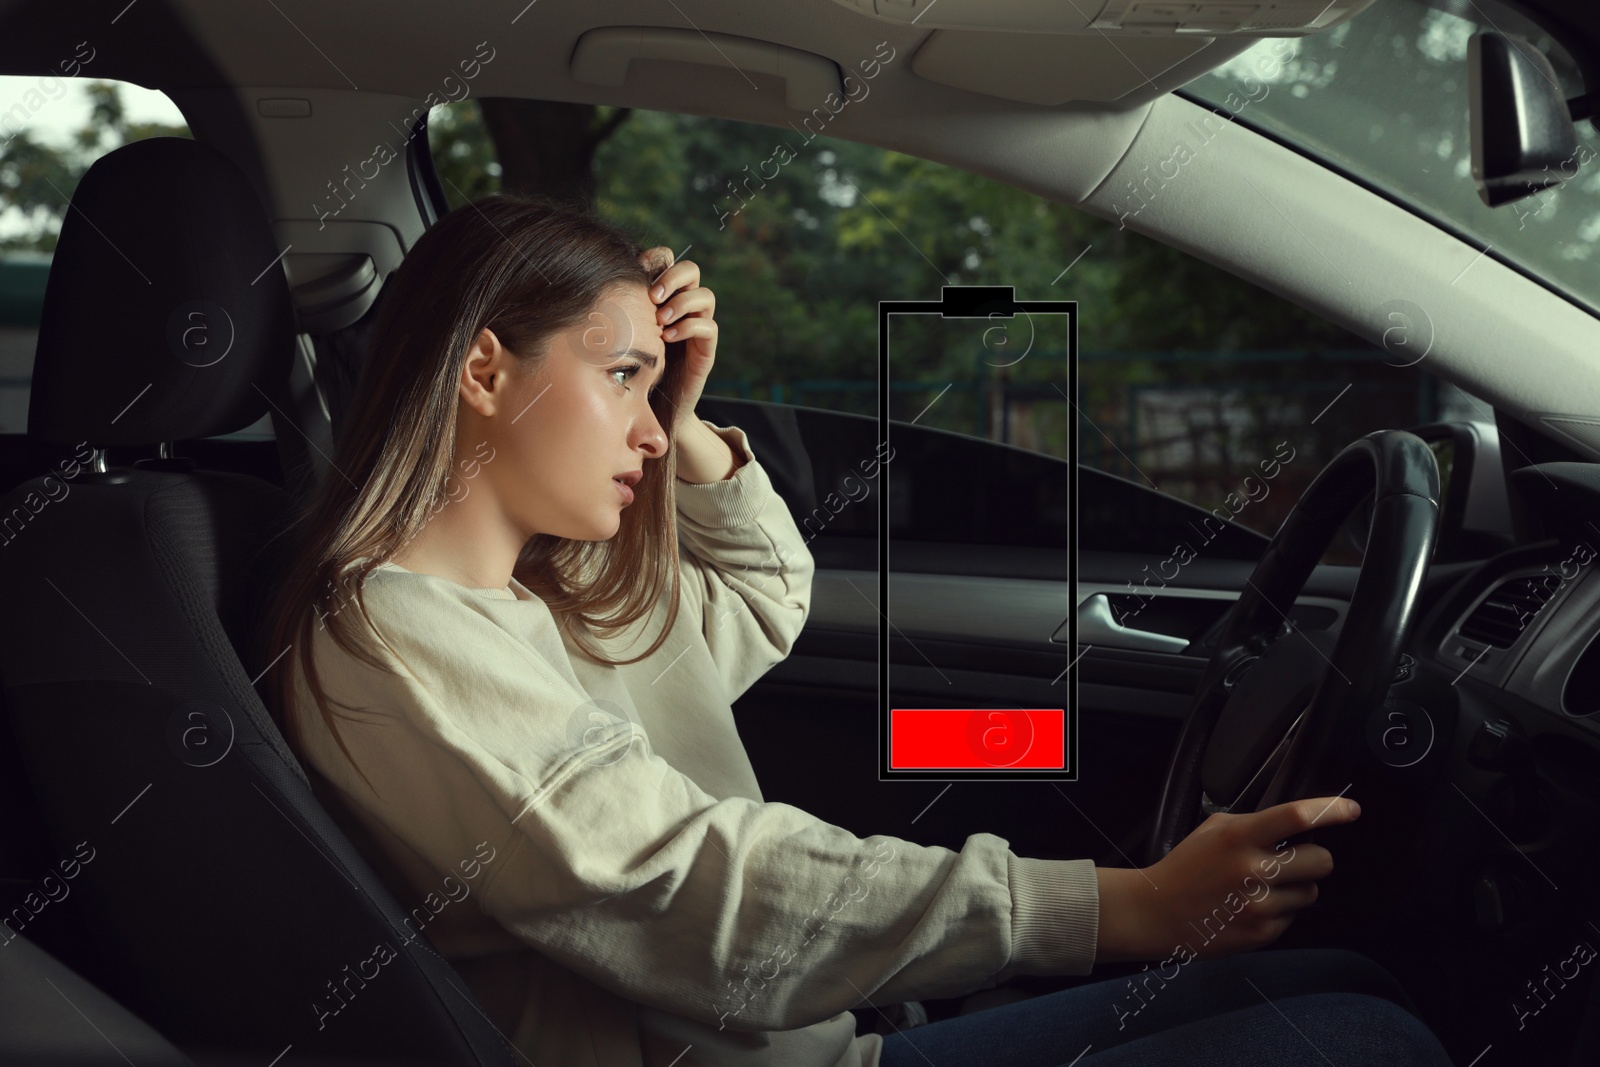 Image of Illustration of discharged battery and tired woman in car. Extreme fatigue